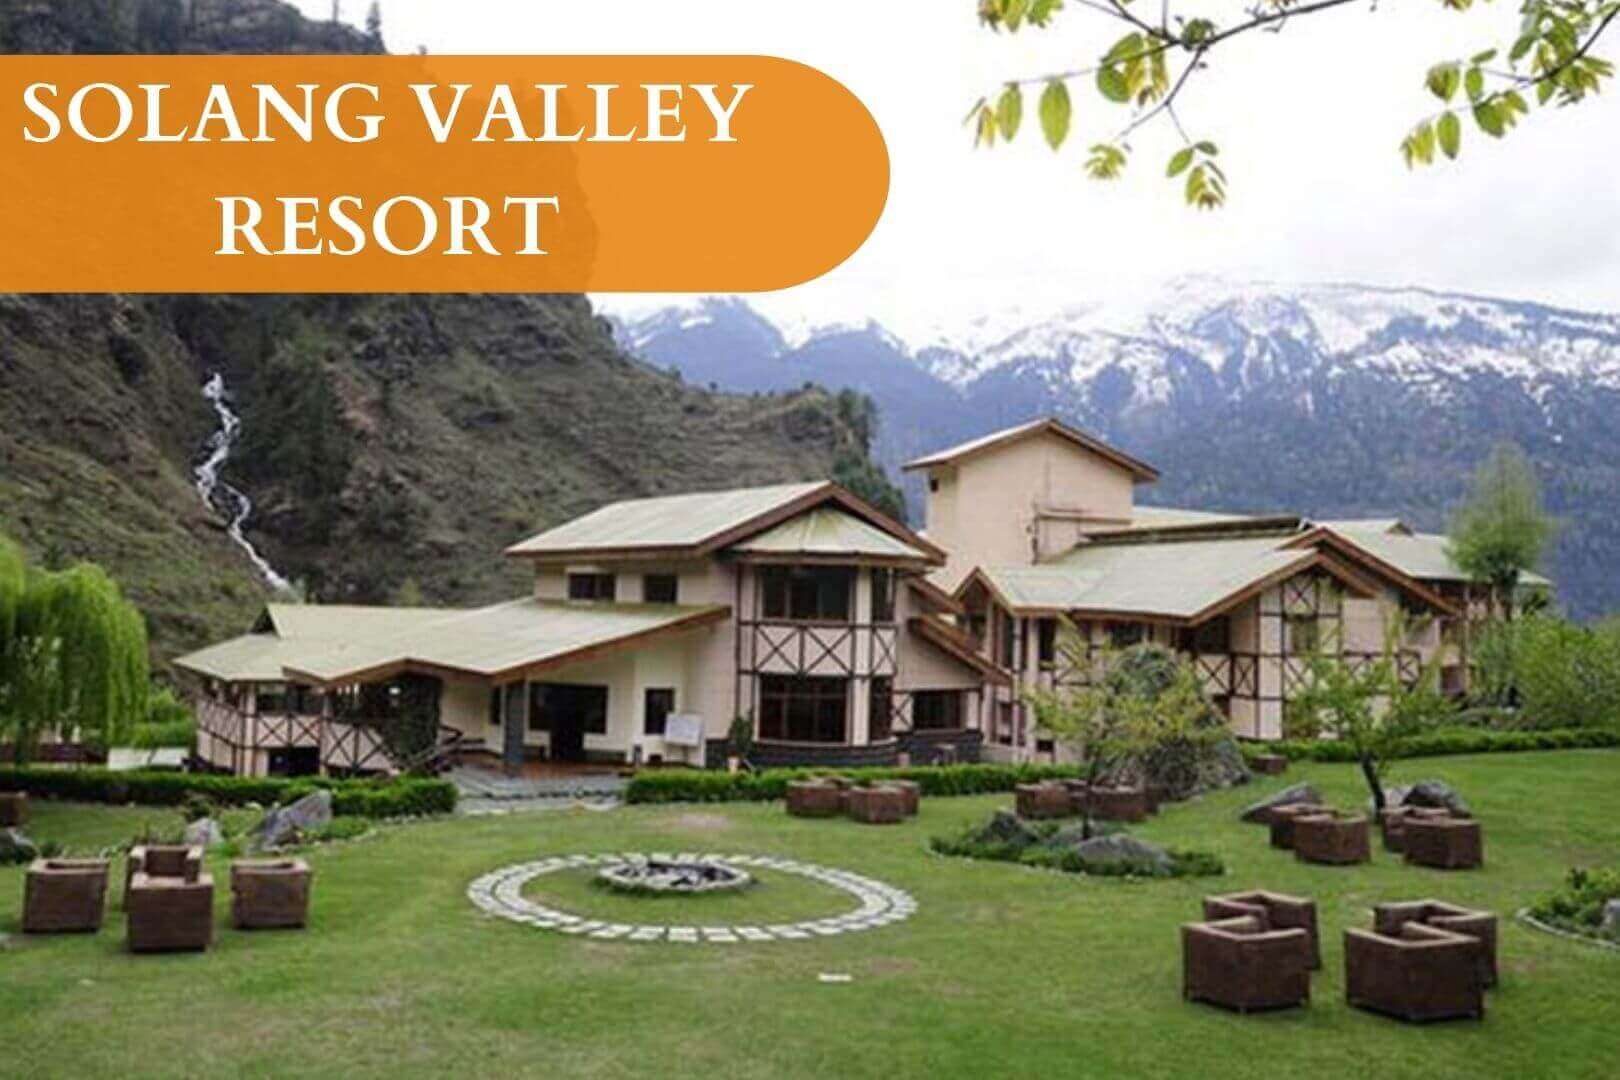 SOLANG VALLEY RESORT, auli ski resort, skiing price in india, skiing packages in india, best ski resorts in india, gulmarg ski resort, ski resort manali, skiing in sikkim, luxury snow resorts india, ski resorts in india, indian ski resorts, best ski resorts in india, ski resorts india, skiing india, ski resort in india, ski resort india, skiing in india, india ski resorts, best place for skiing in india, best place to ski in india, best places to ski in india, best skiing places in india, ski india, ice skiing in india, skiing resort in india, solang ski resort, india ski resort, skiing resorts in india, ski resorts in the himalayas, skiing destinations in india, snow resorts in india, india skiing, try ski, best ski resort in india, skiing places in india, ski in india, snow skating in india, mountain resort in india, fagu ski resort, sking in india, best mountain resorts in india, ski resort himalayas, best places for skiing in india, snow view mountain resort, snow valley hotels, best places to ski, indian ski, ski places in india, best winter resorts in india, snow skiing in india, india ski, himalayan snow heights, ski resort manali, top snow resorts,